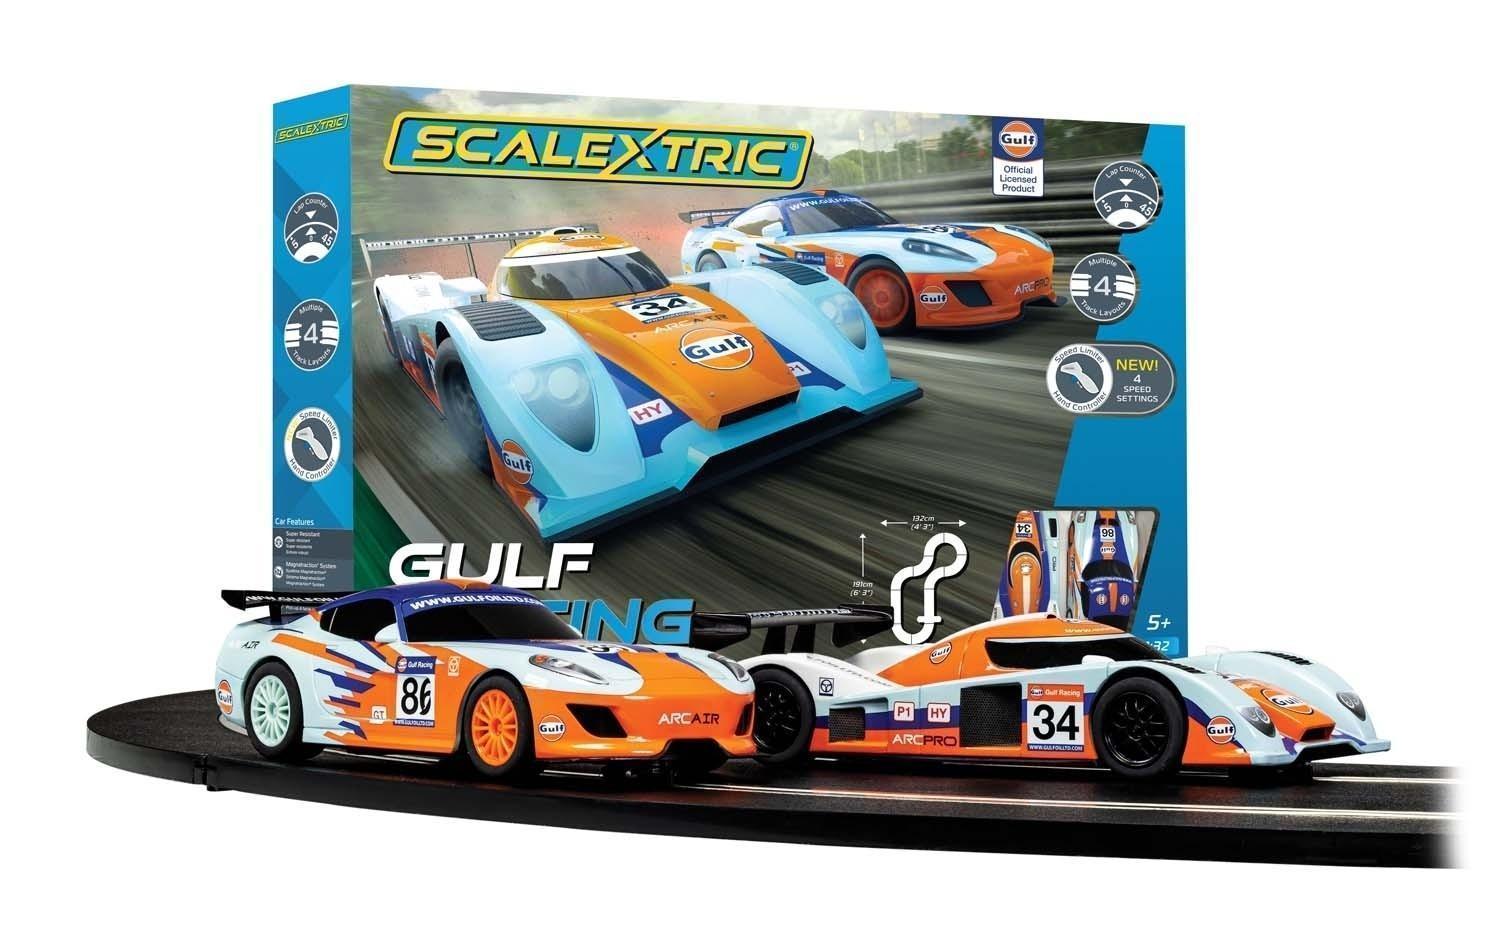 Scalextric Gulf Racing Set LMP VS GT Gulf 1:32 Scale Track, Cars and Controller Included Model Slot Car